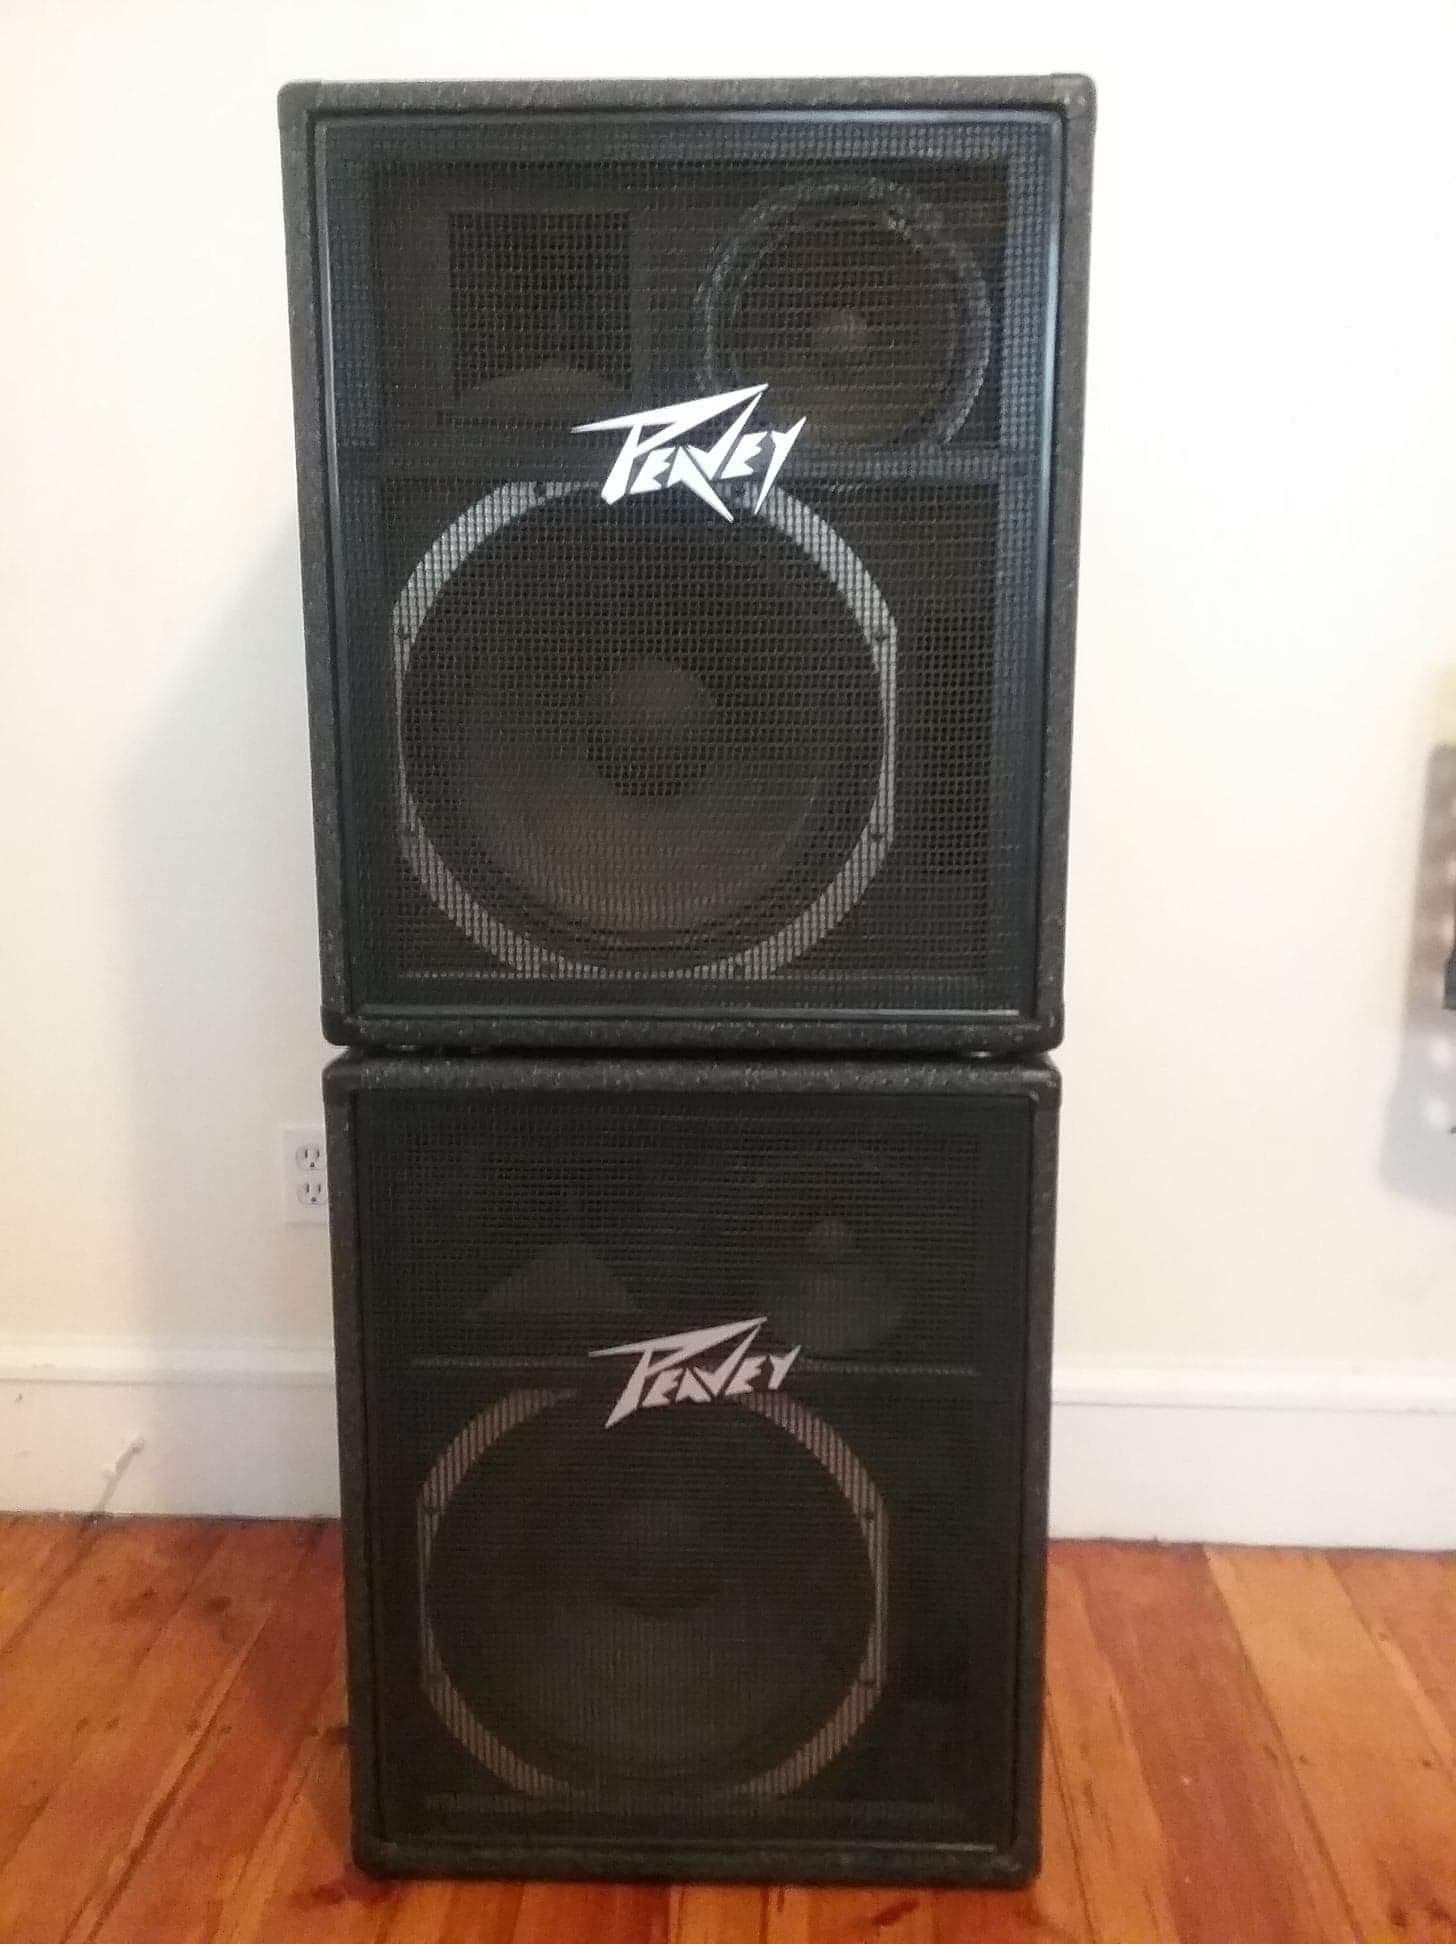 Peavey 358-S with 15" x 8" Pair of Speakers in good condition